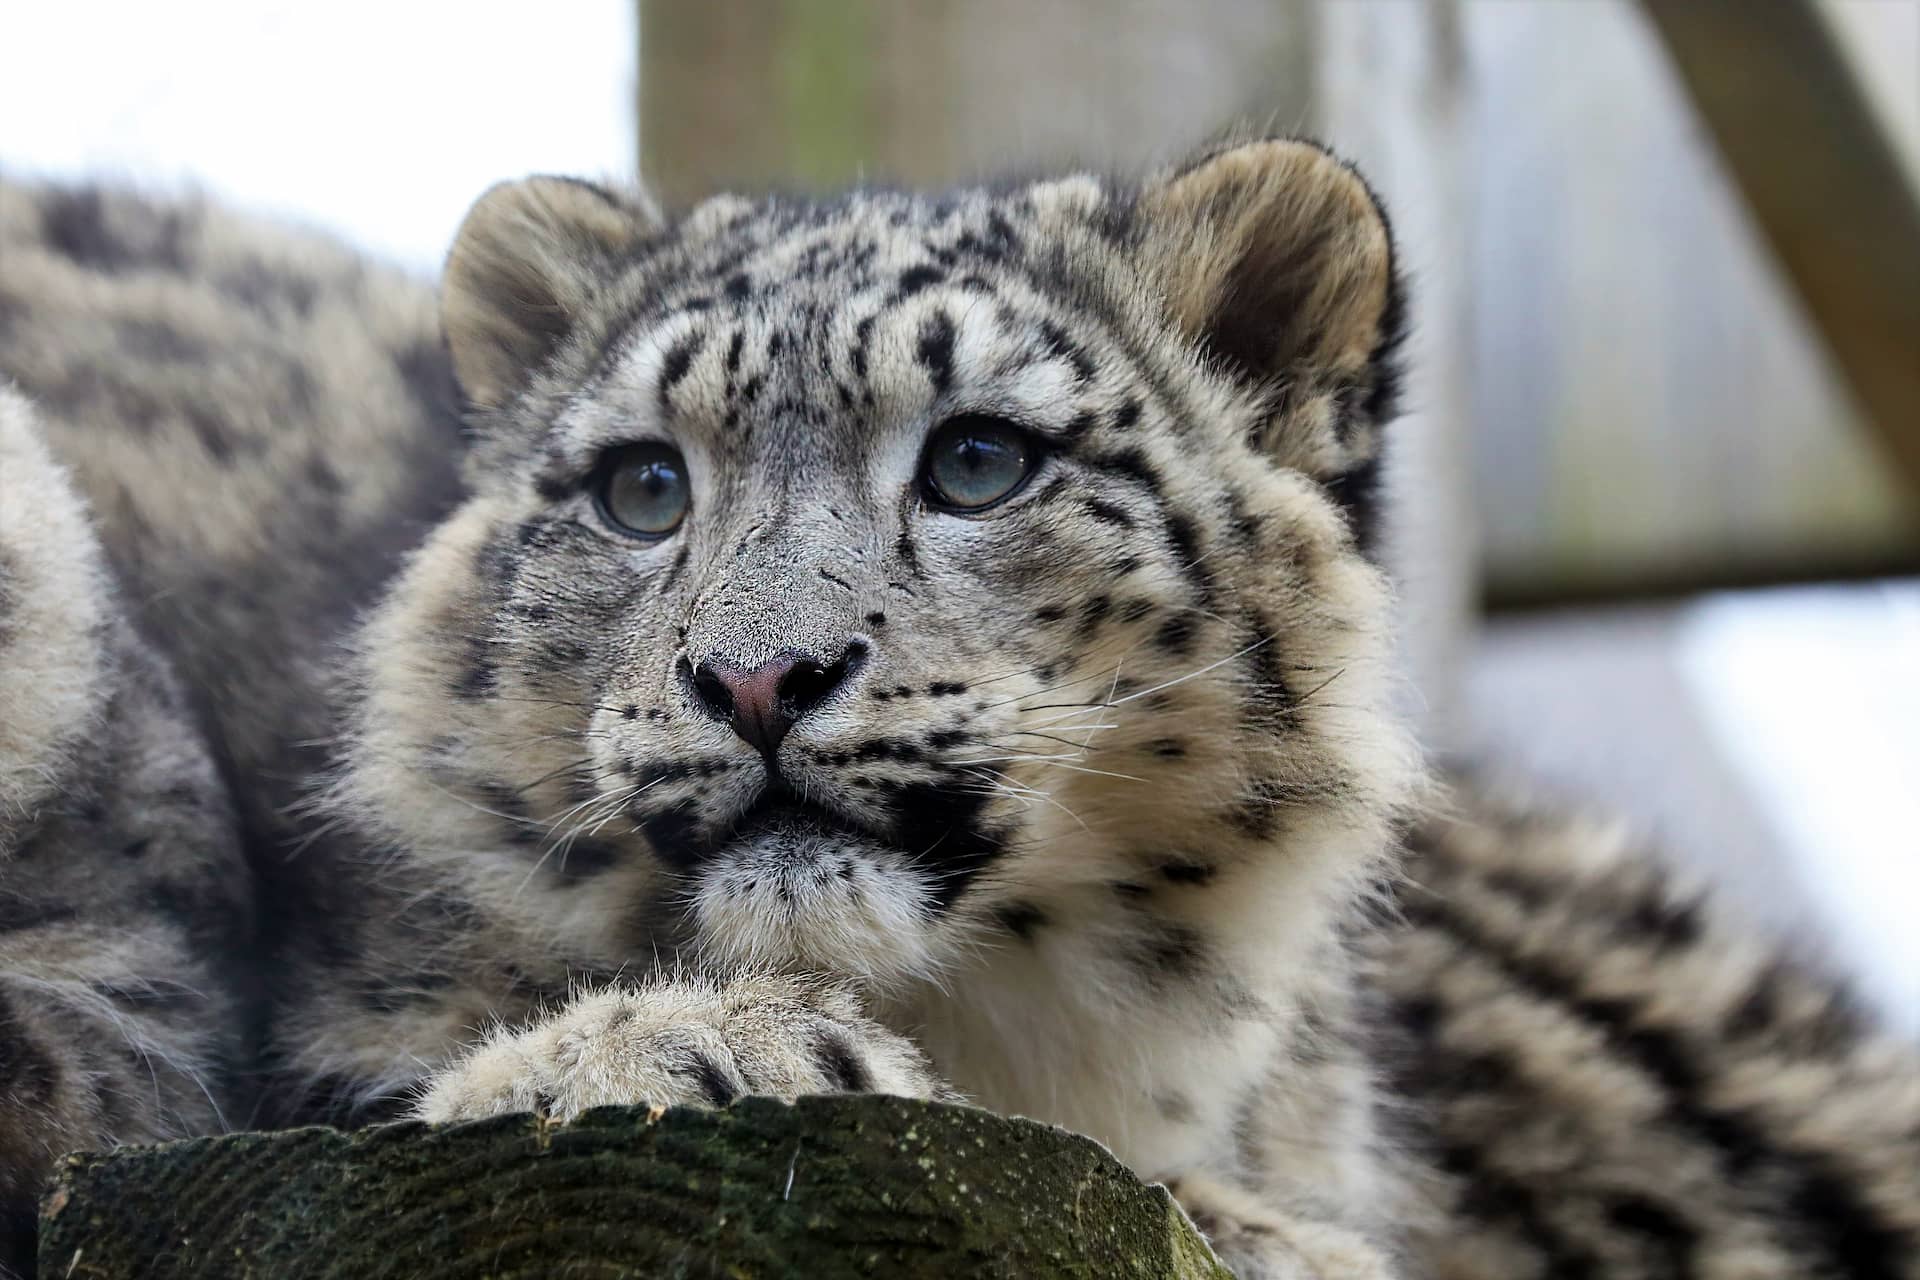 Snow leopard cub sat on platform looking to the left. IMAGE: Amy Middleton 2023